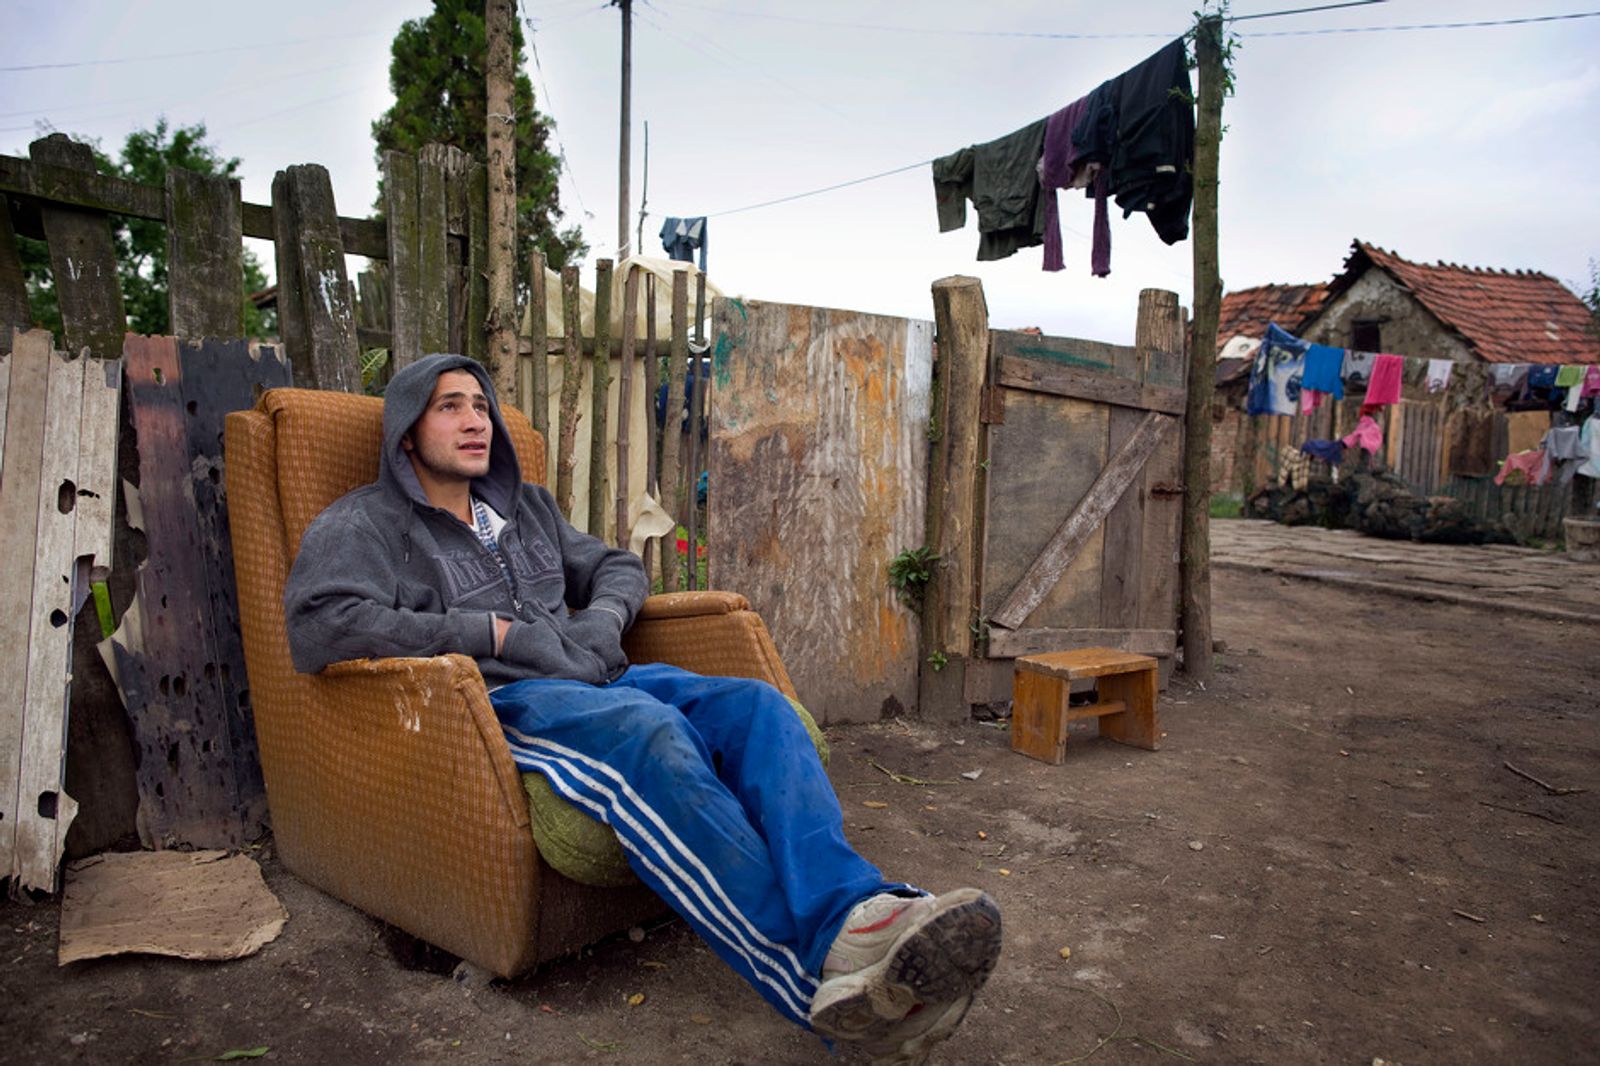 © Toby Binder - Image from the Violence and social exclusion - Roma people in Hungary photography project